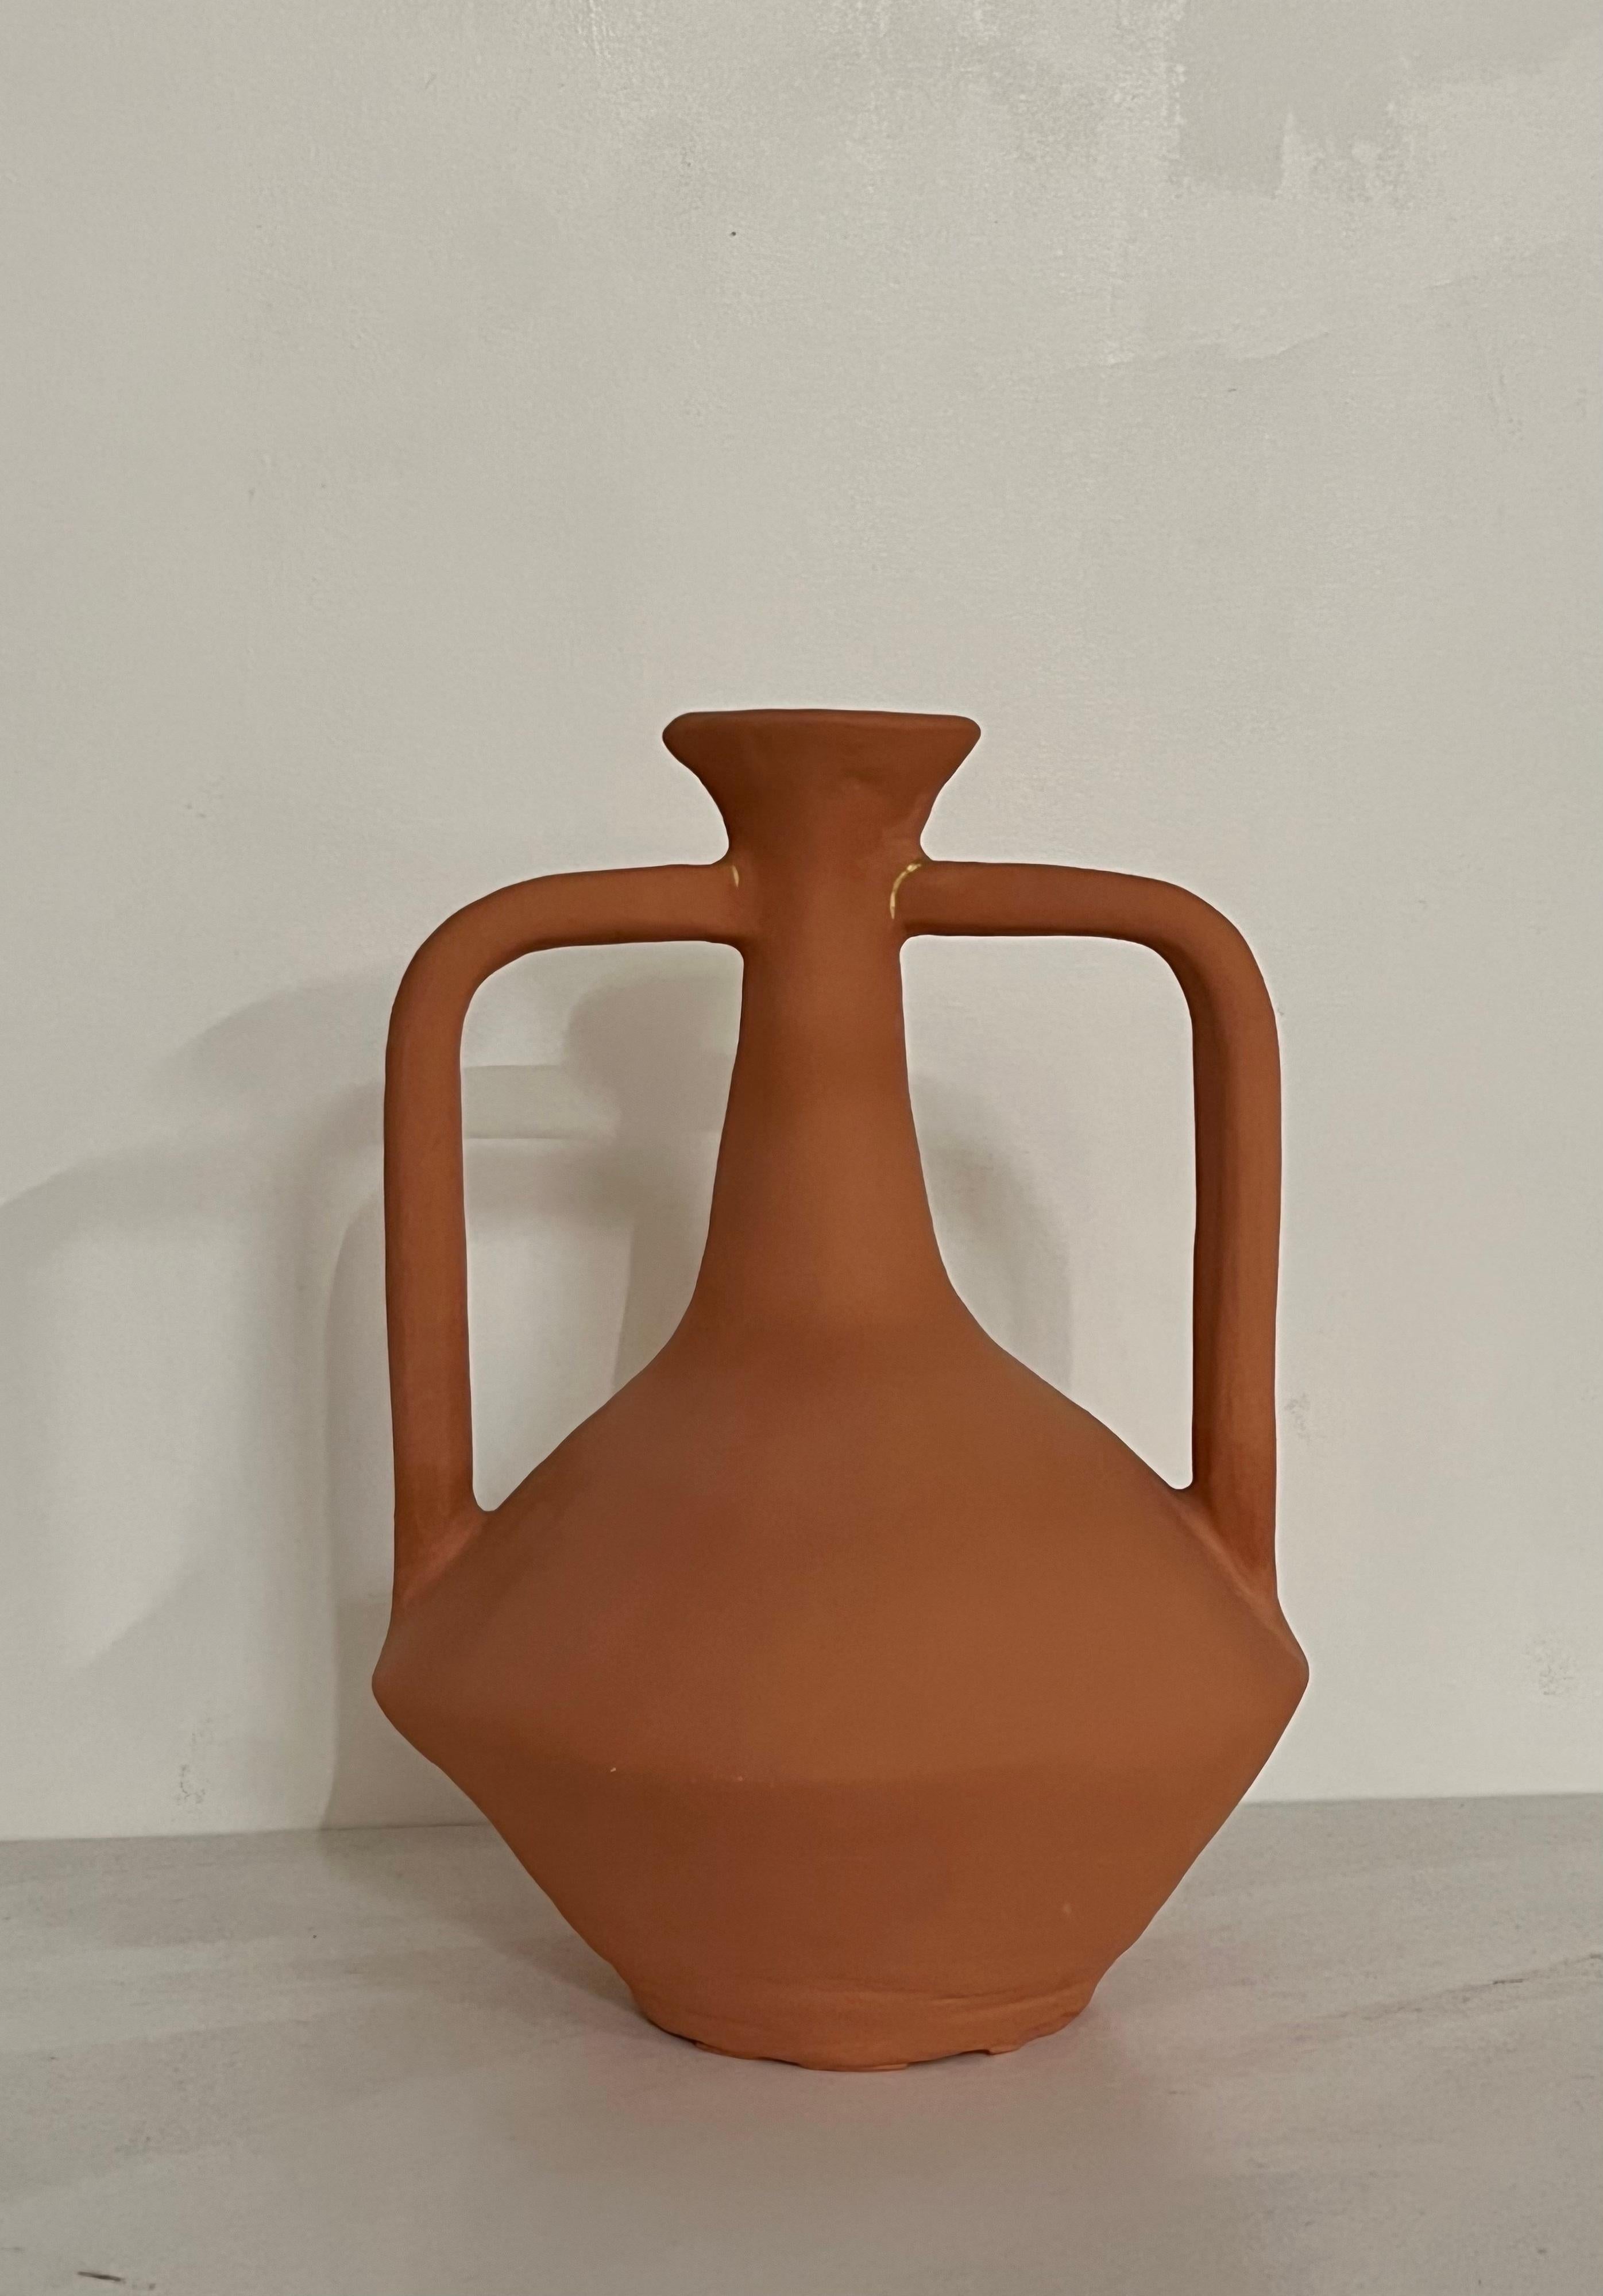 Terracotta short neck vase by Solem Ceramics.
Dimensions: Ø 20.5 x H 30.5 cm.
Materials: red stoneware, terracotta slip.

Solem’s work pulls from memories of the architecture and community within SWANA and Southeast Asia thorough exploring